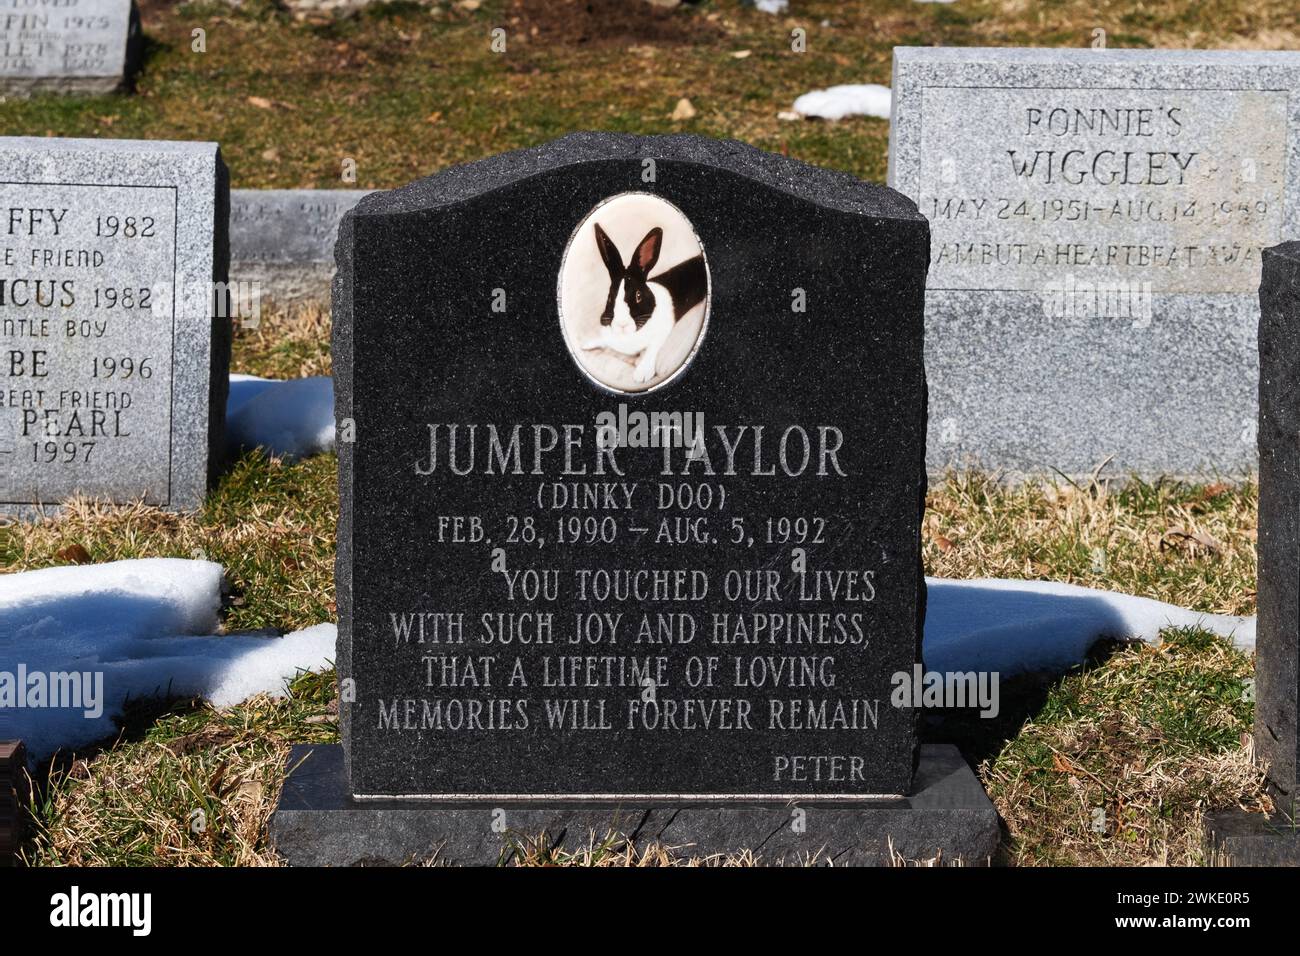 A headstone of Jumper Taylor with a photo & lovely inscription. At a pet cemetery in Westchester, New York. Stock Photo